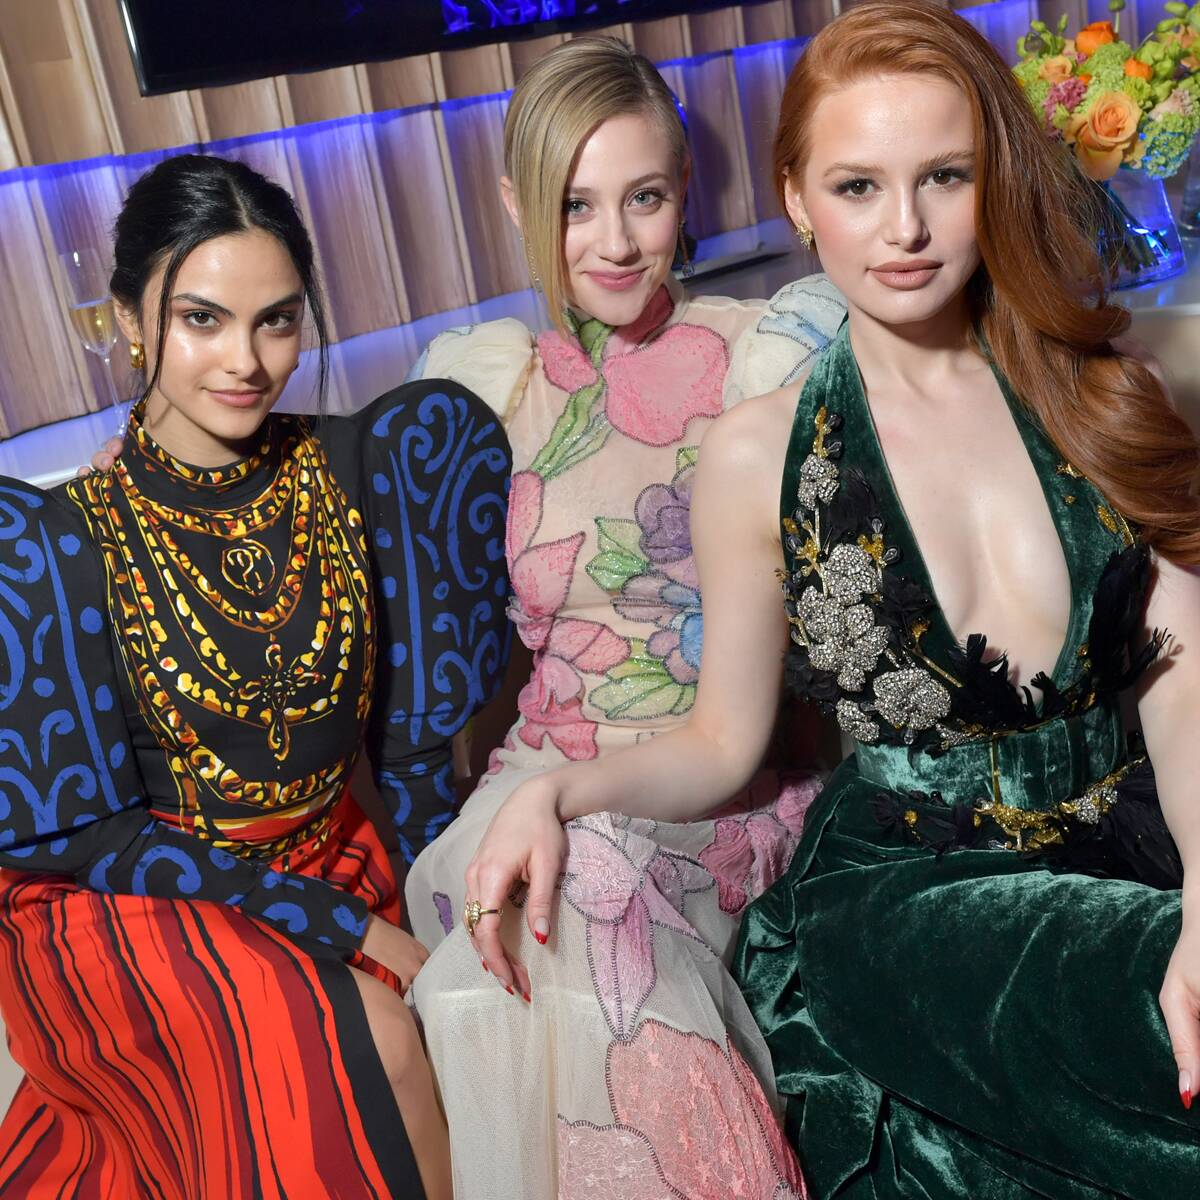 Camila Mendes Has "Never Been Closer" With Lili Reinhart and Madelaine Petsch After Shared Breakups